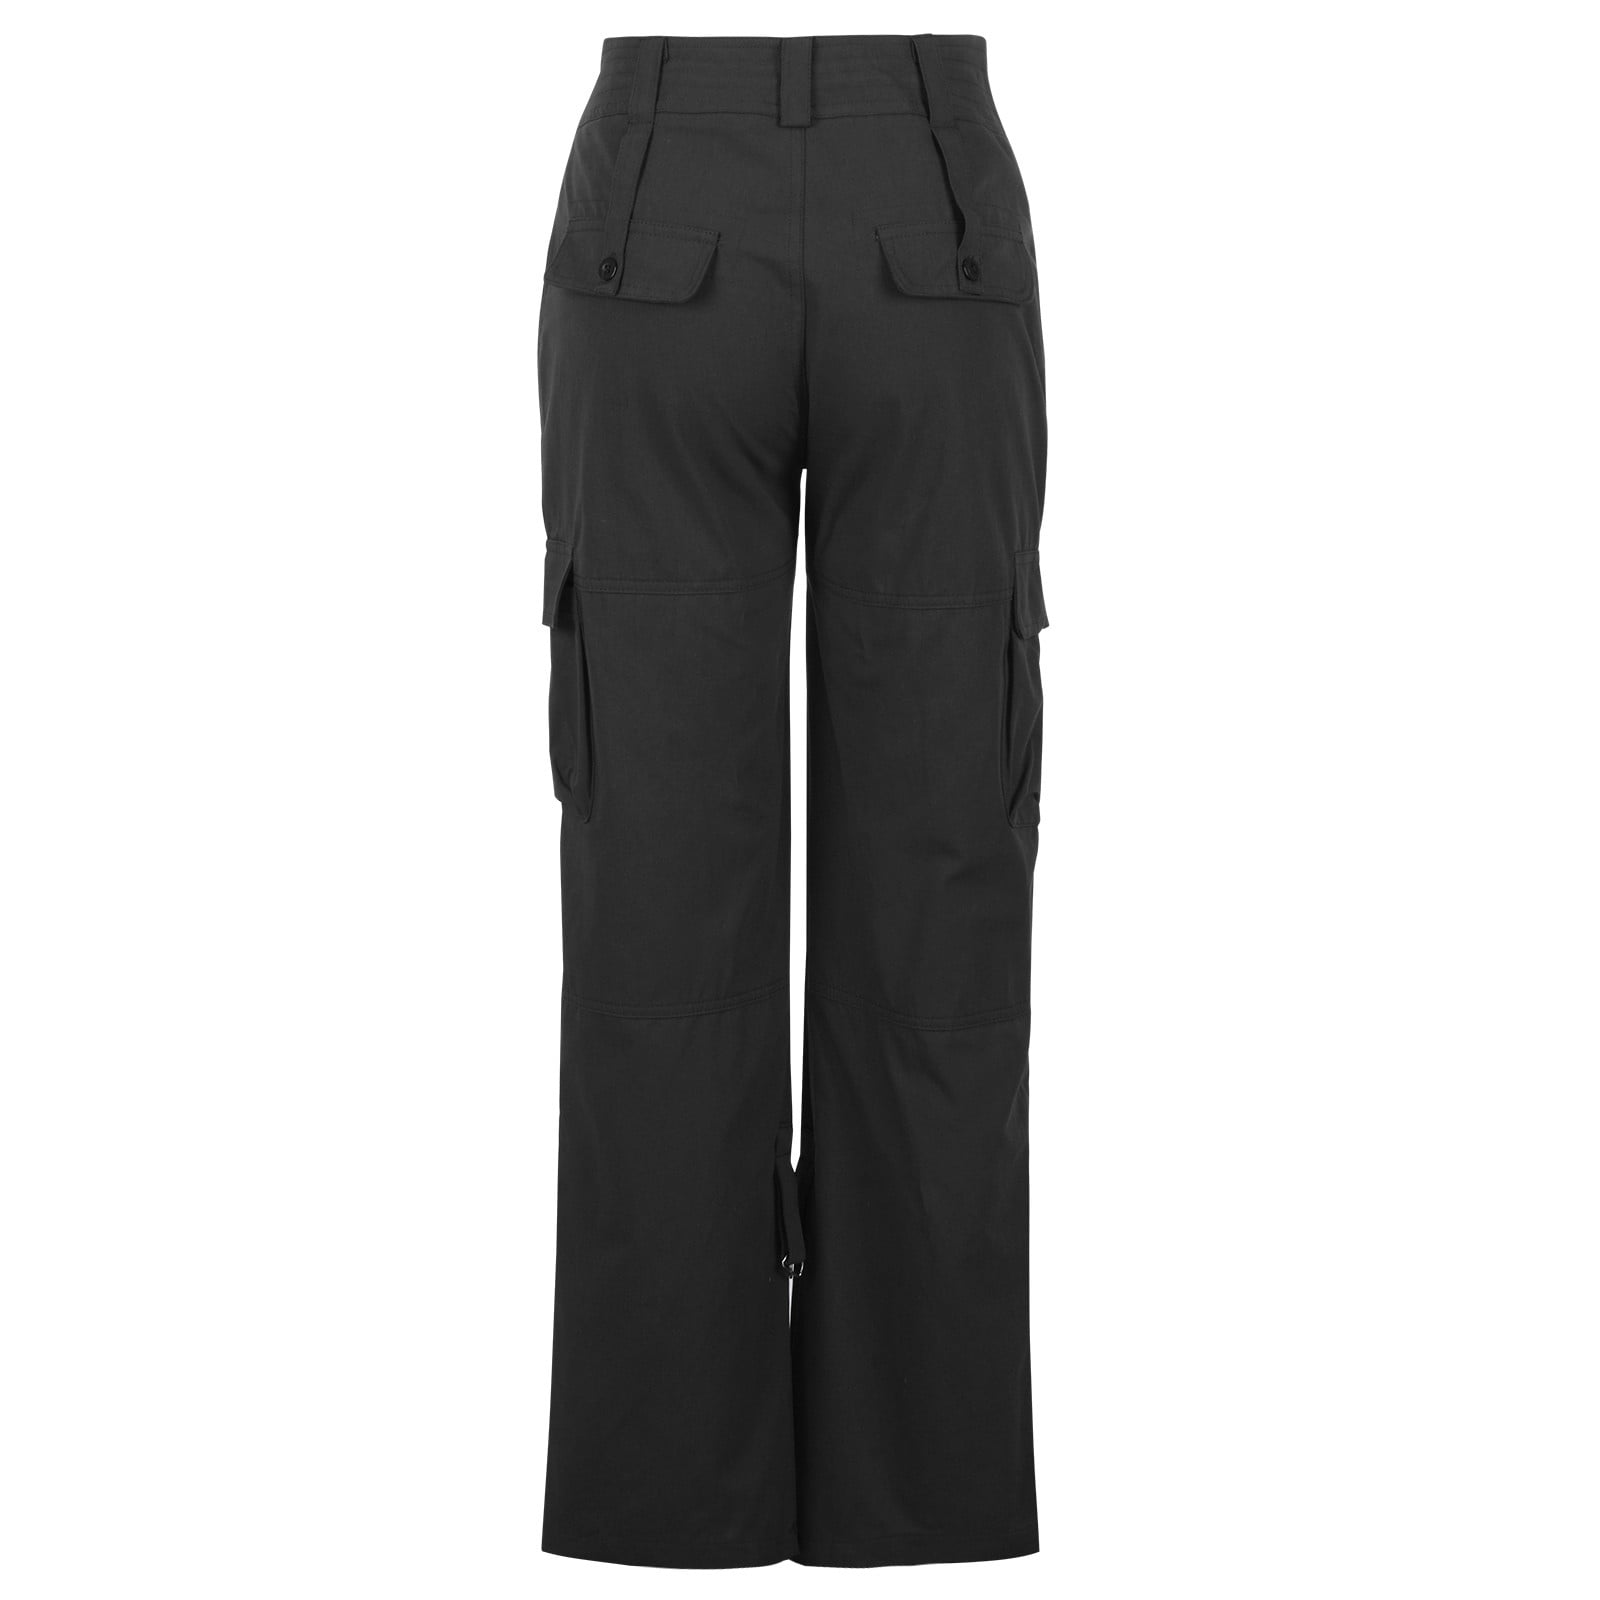  Cargo Pants for Women Multi- Pockets Low Rise Solid Color  Overalls Trousers Ladies Wide Leg Streetwear Sweatpants (X-Small, BlackA1)  : Clothing, Shoes & Jewelry